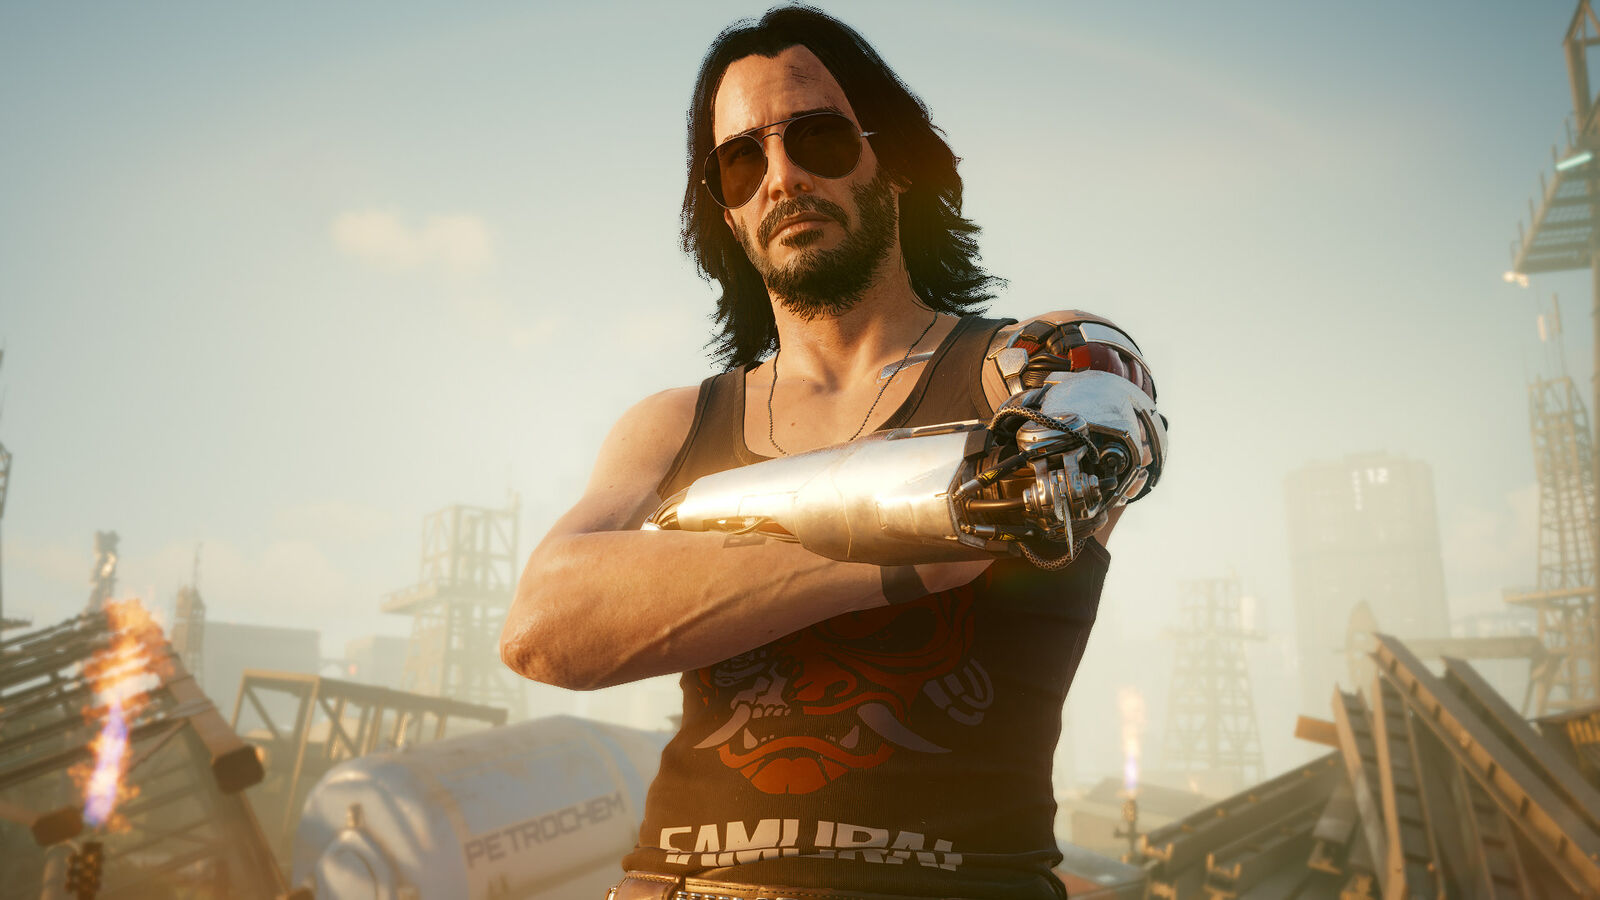 Cyberpunk 2077' will get a 'Game of the Year' edition